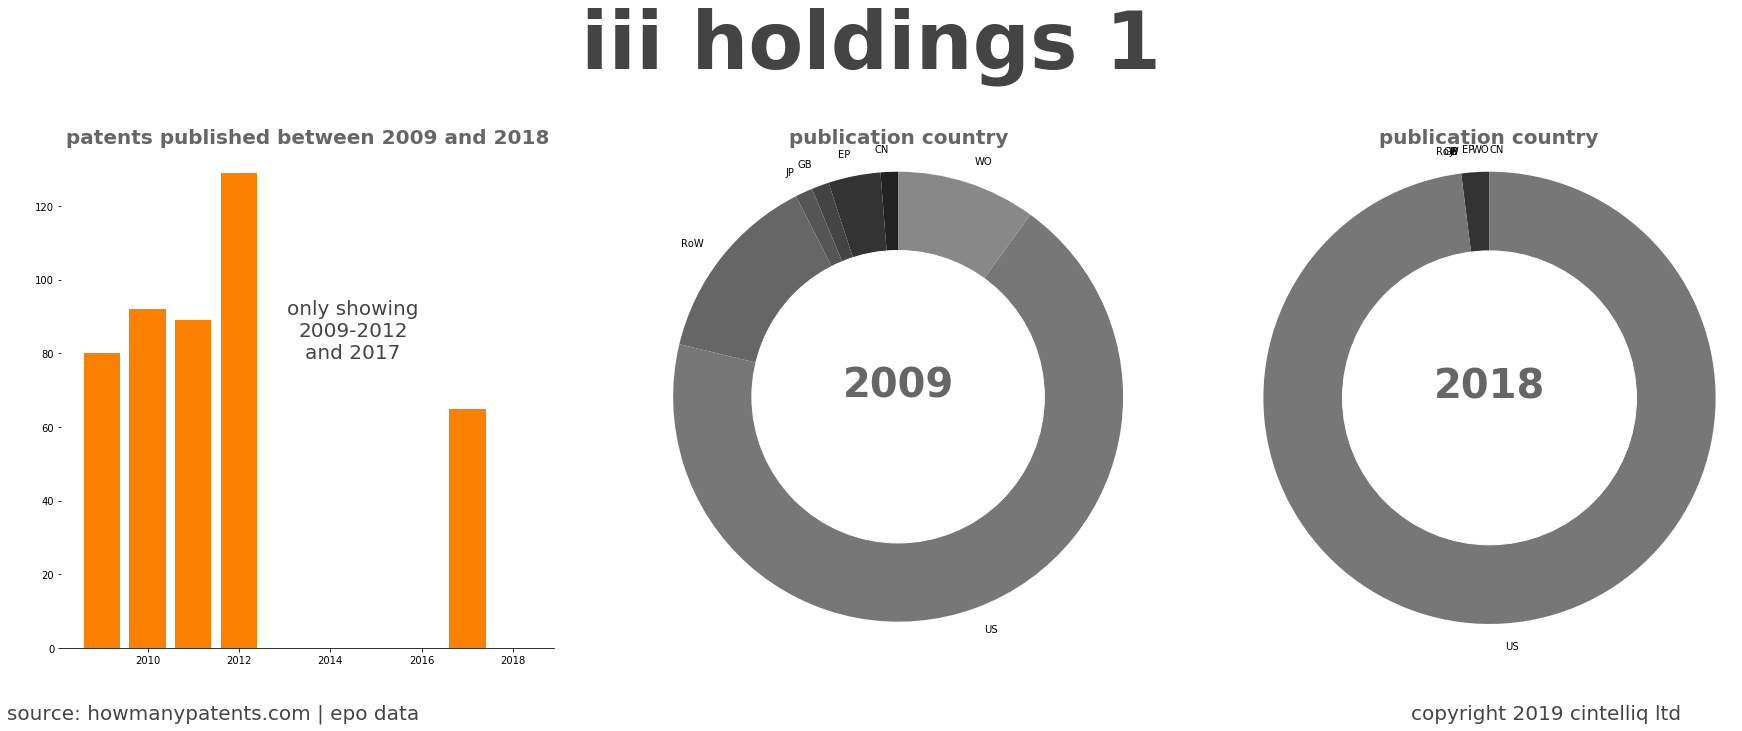 summary of patents for Iii Holdings 1